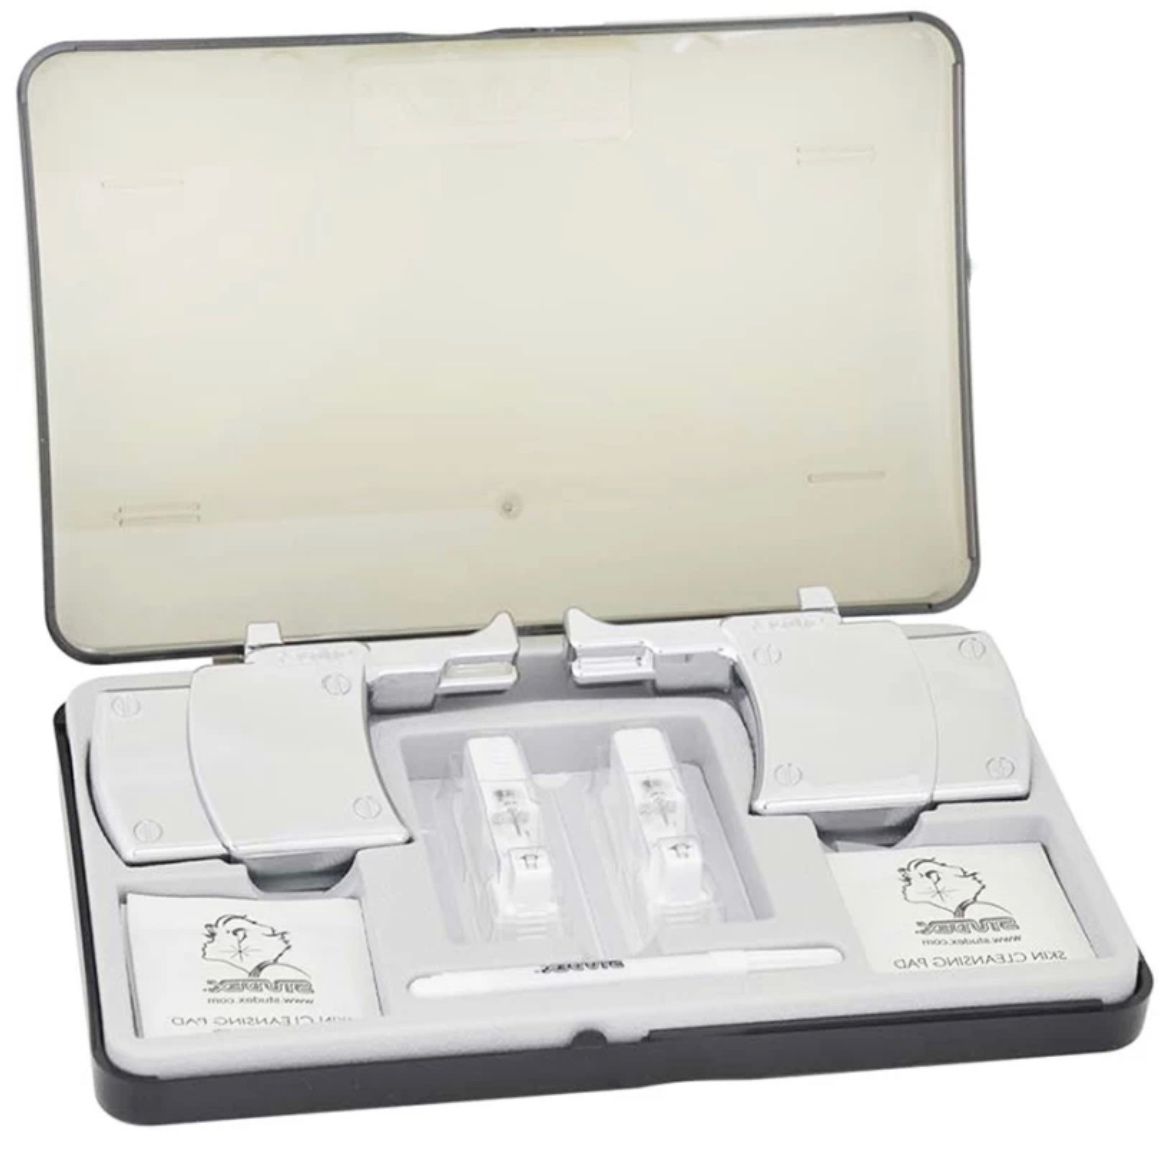 STUDEX instrument for ear piercing compl. / 9151 Box 2 Studex SYSTEM75